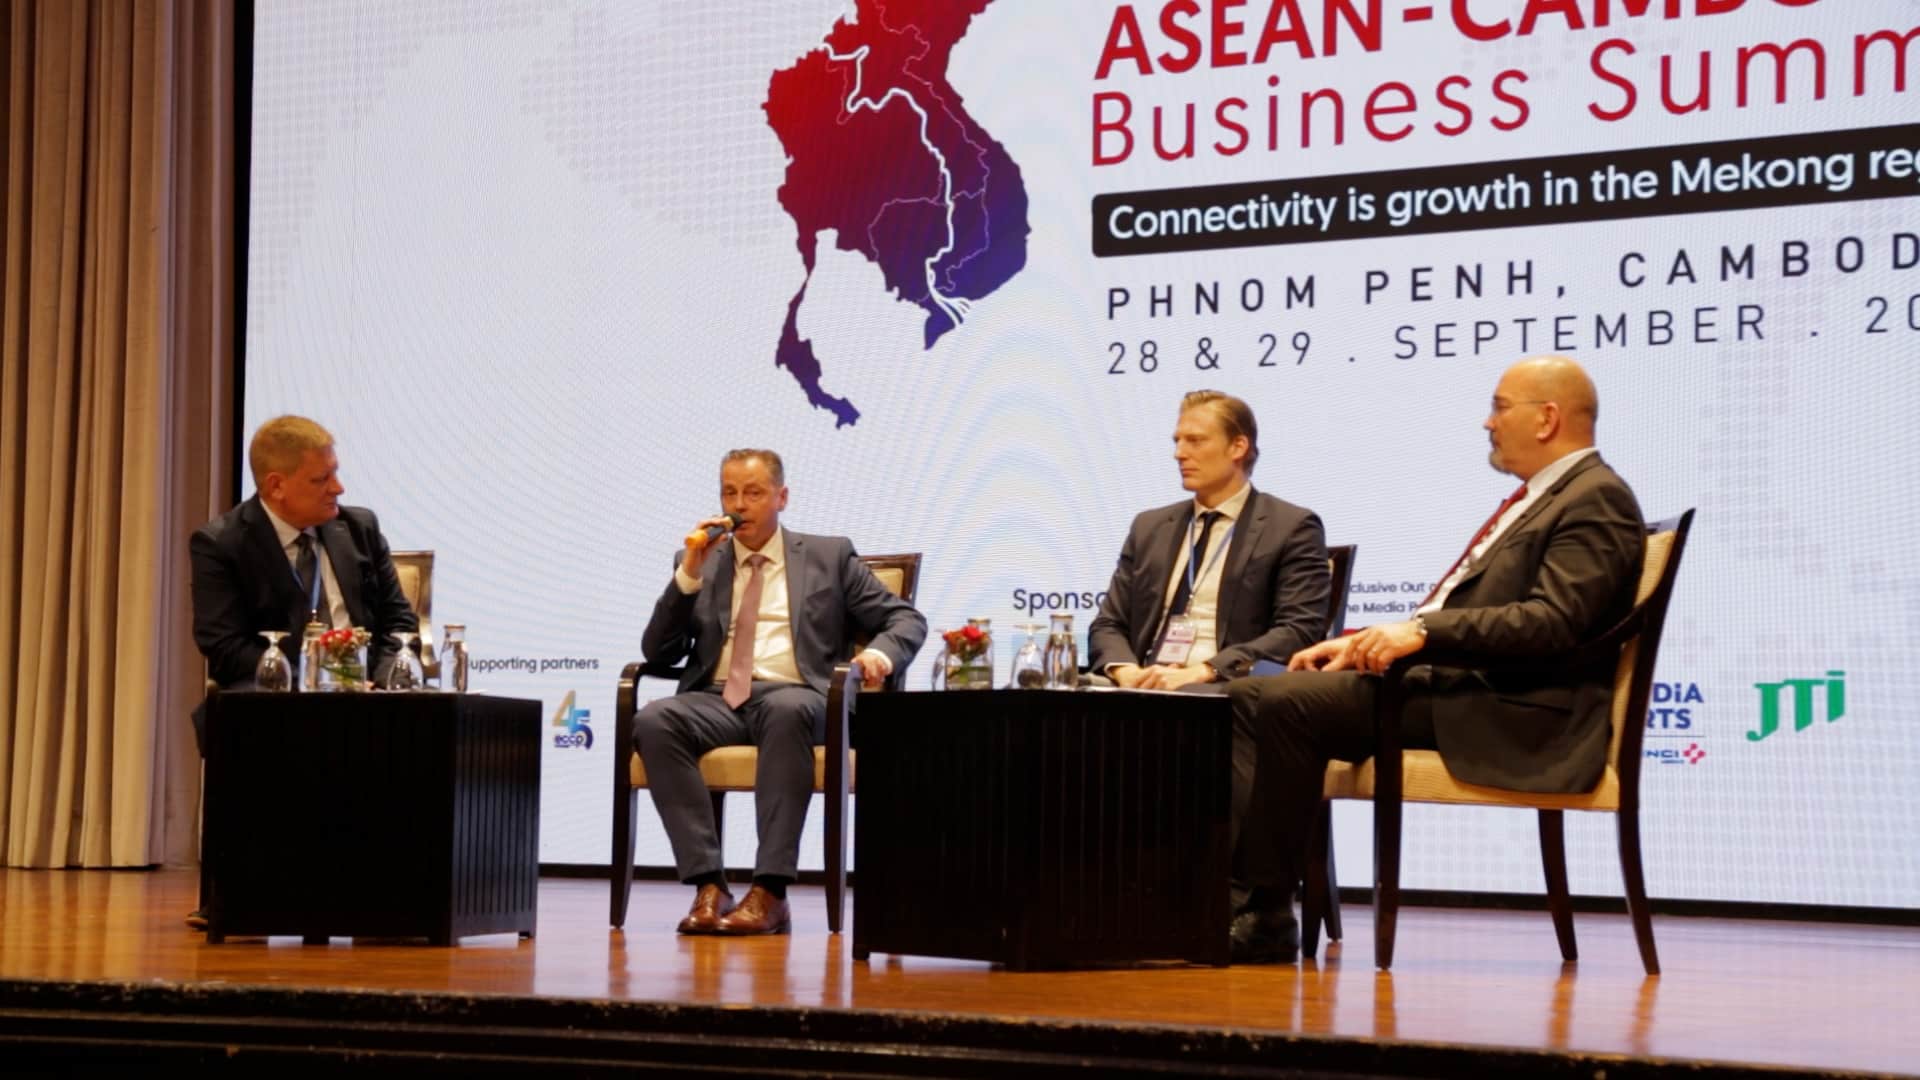 Panel discussion on improving regional connectivity at the ASEAN-Cambodia Business Summit